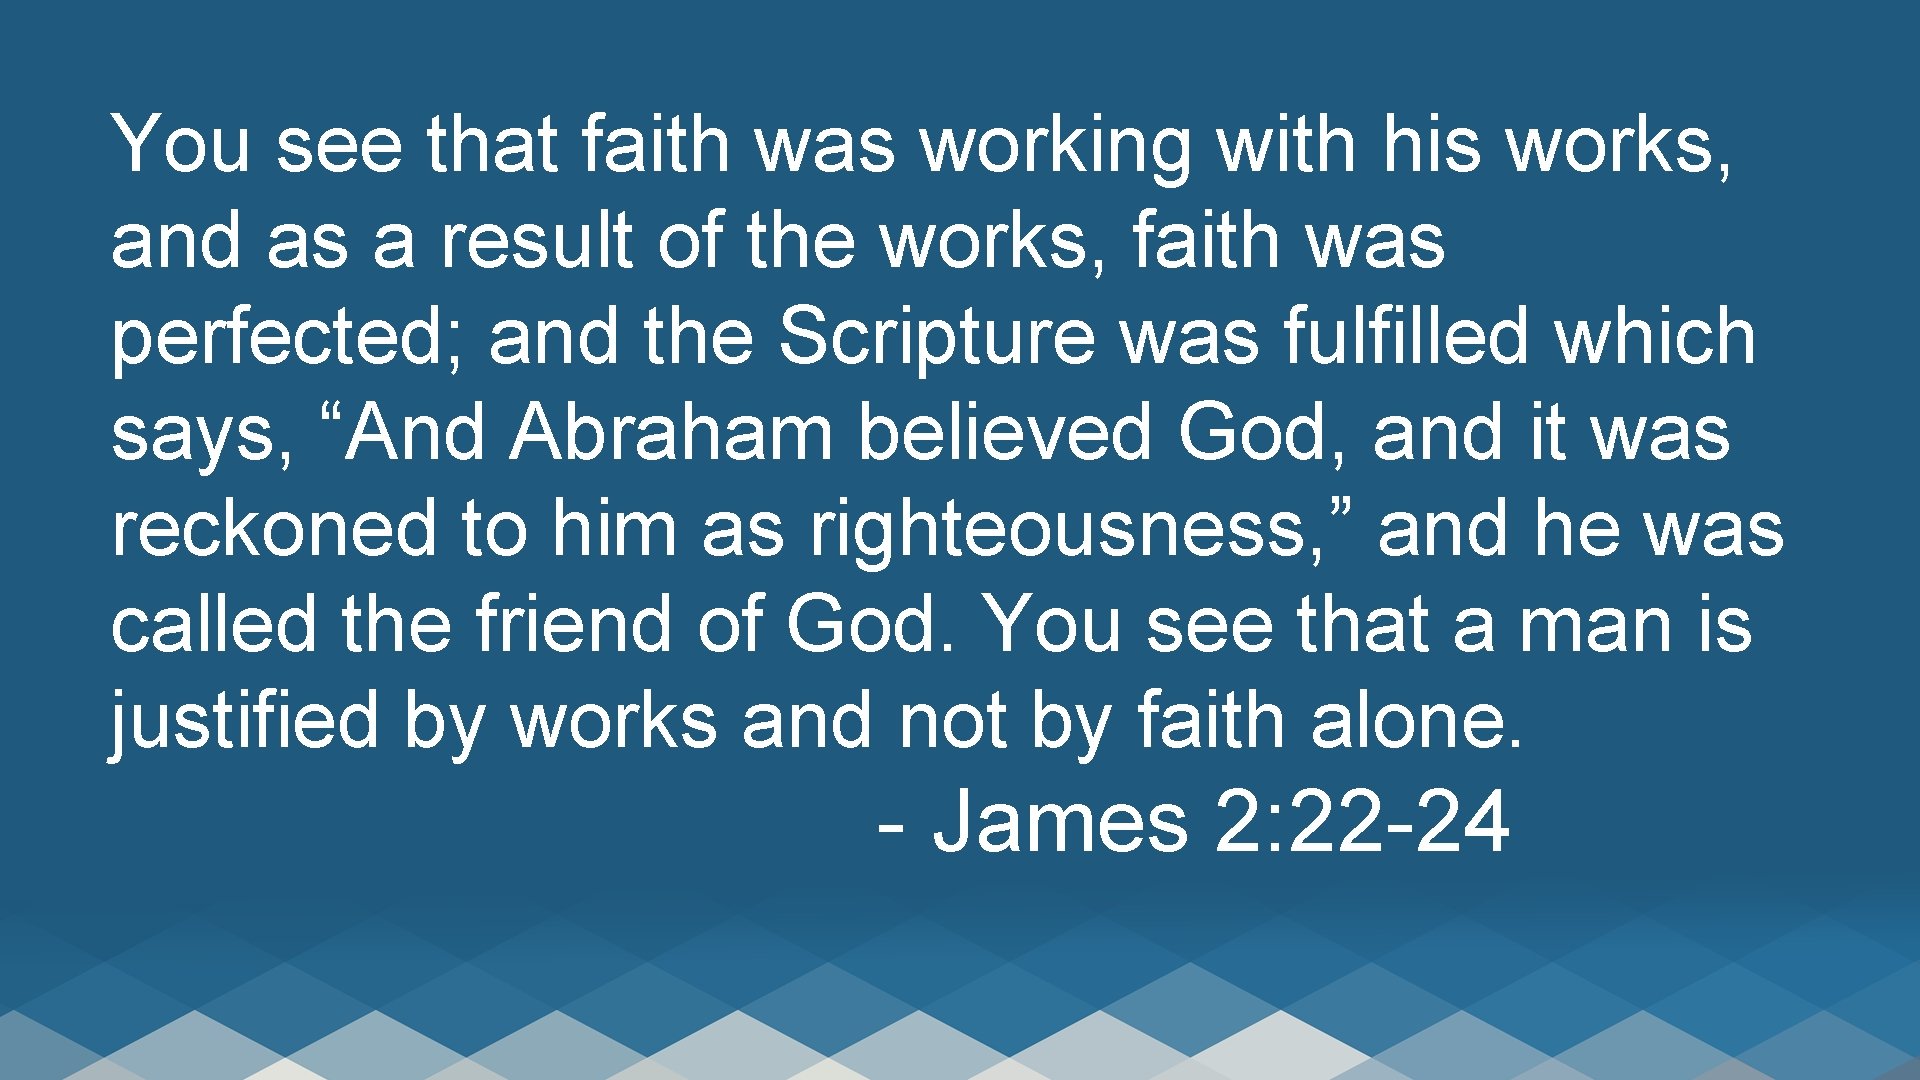 You see that faith was working with his works, and as a result of